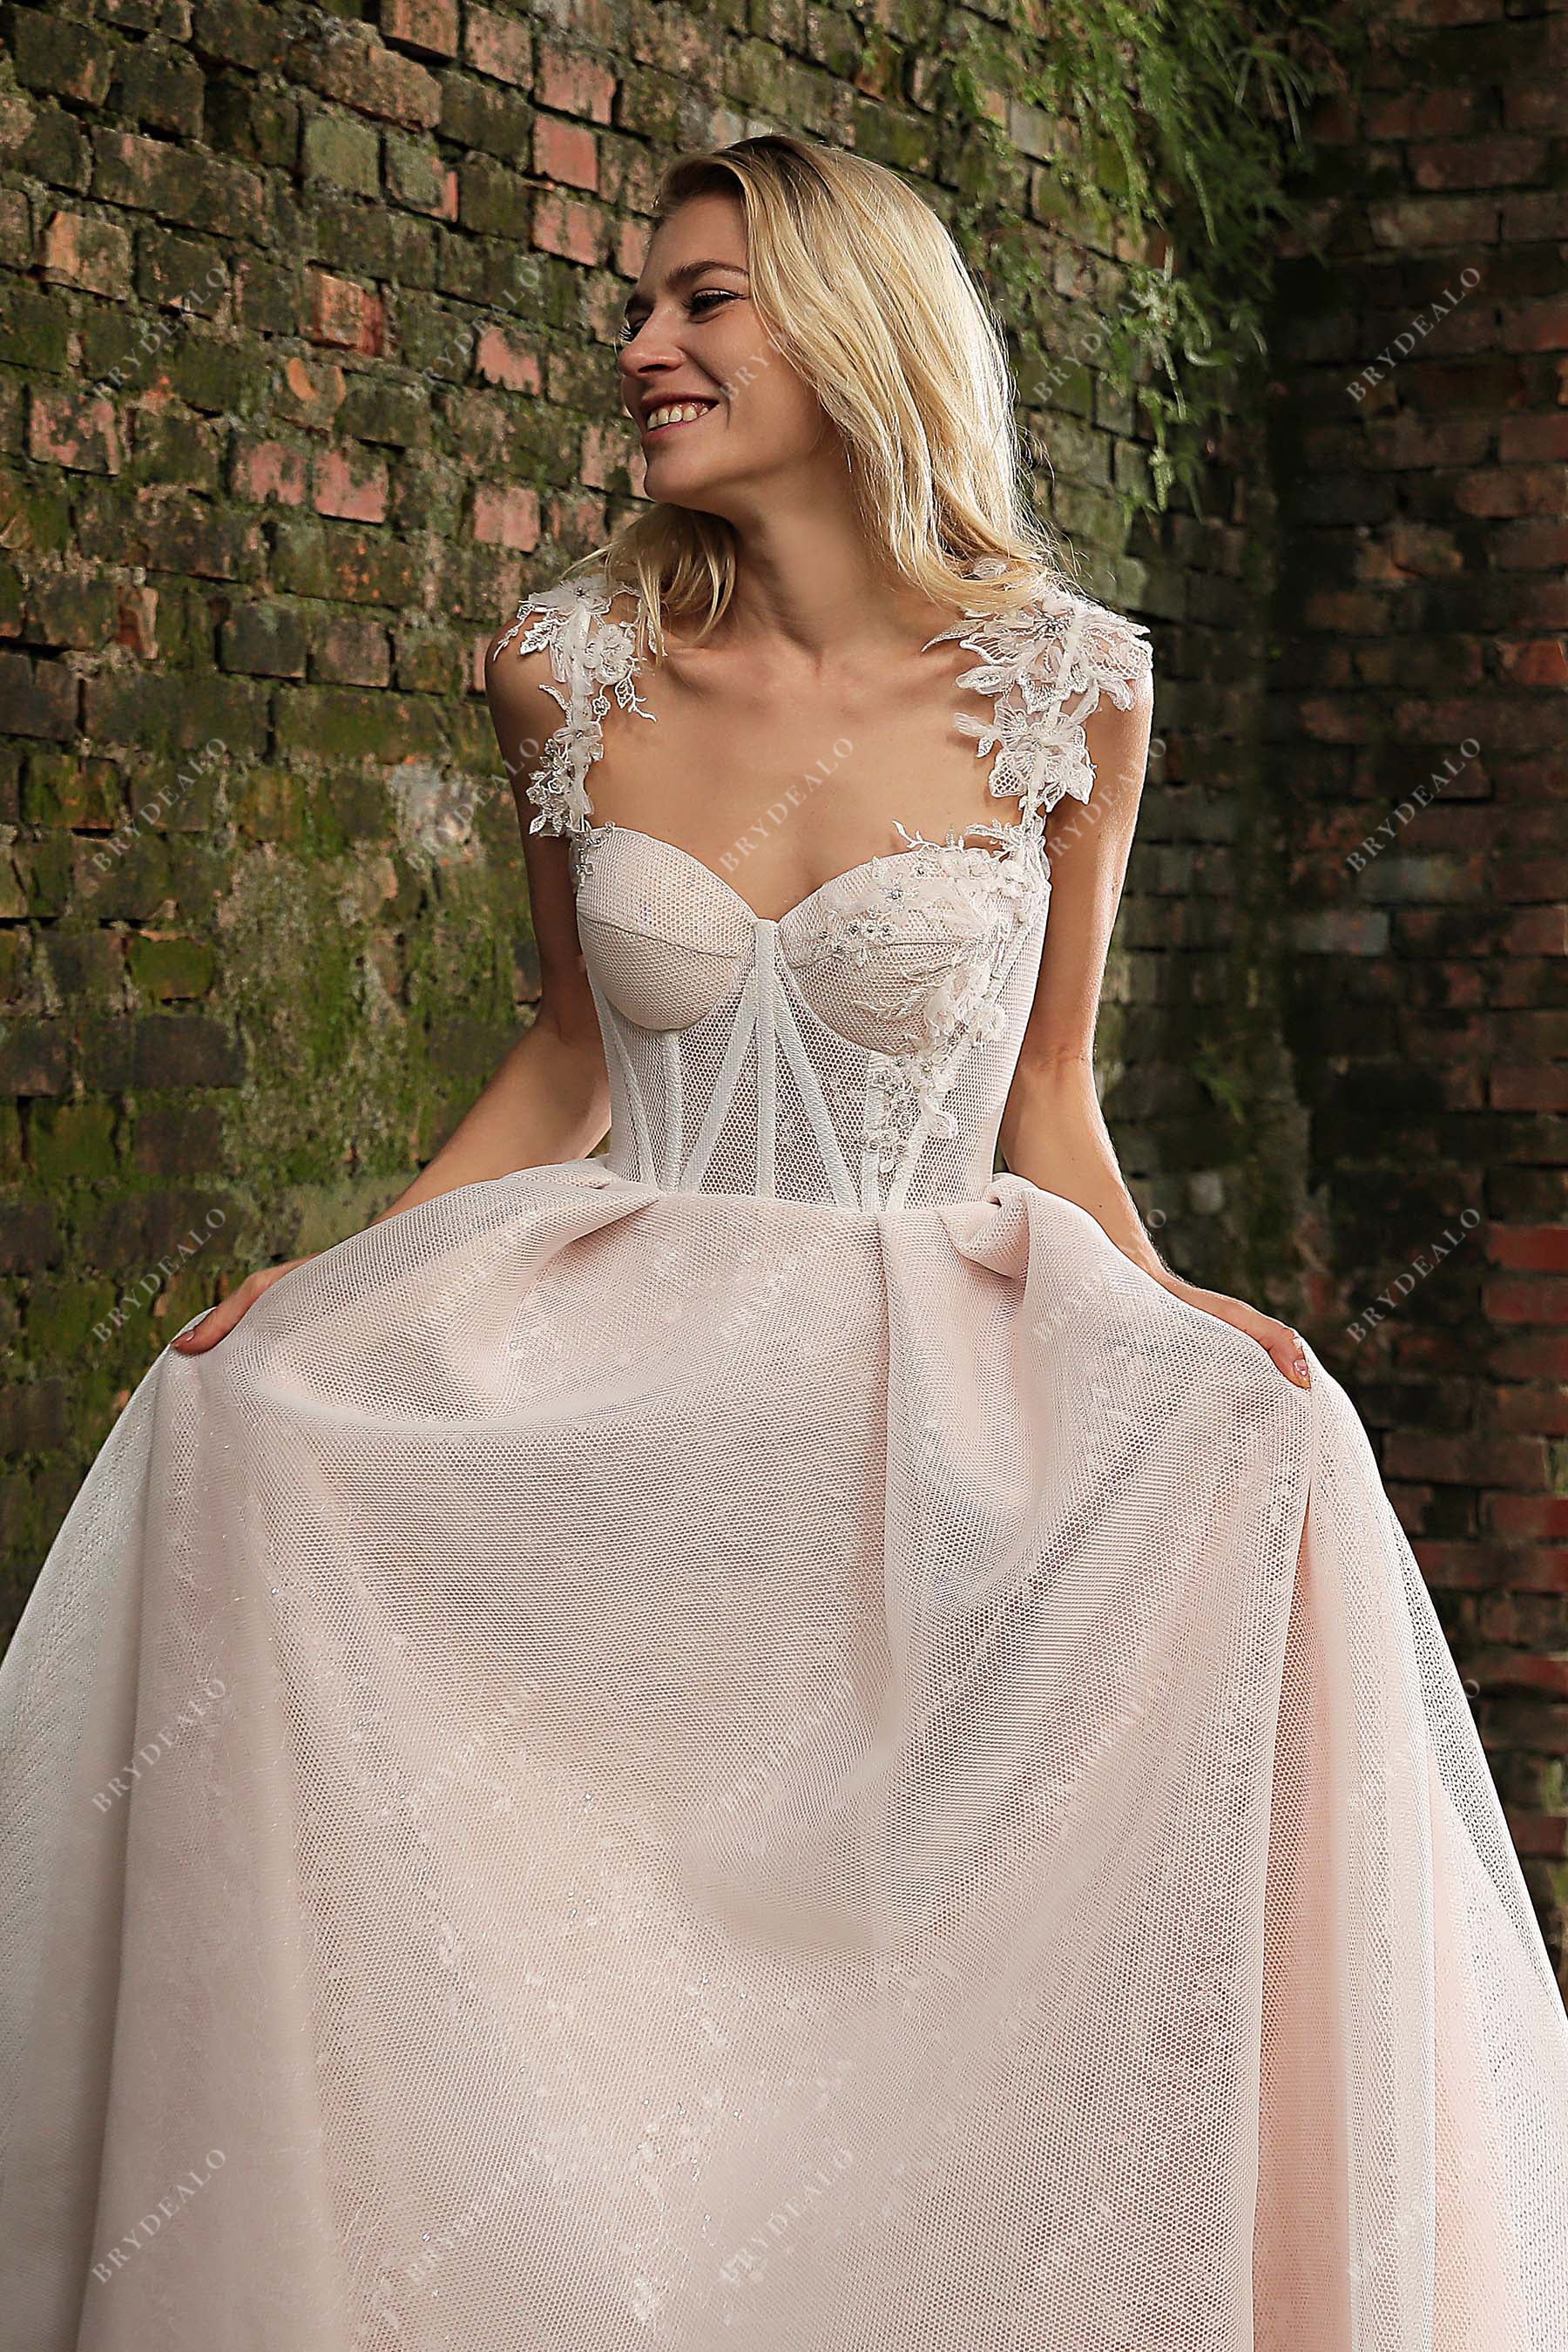 Appliqued Straps Sweetheart Neck Pinkish Corset Bridal Gown